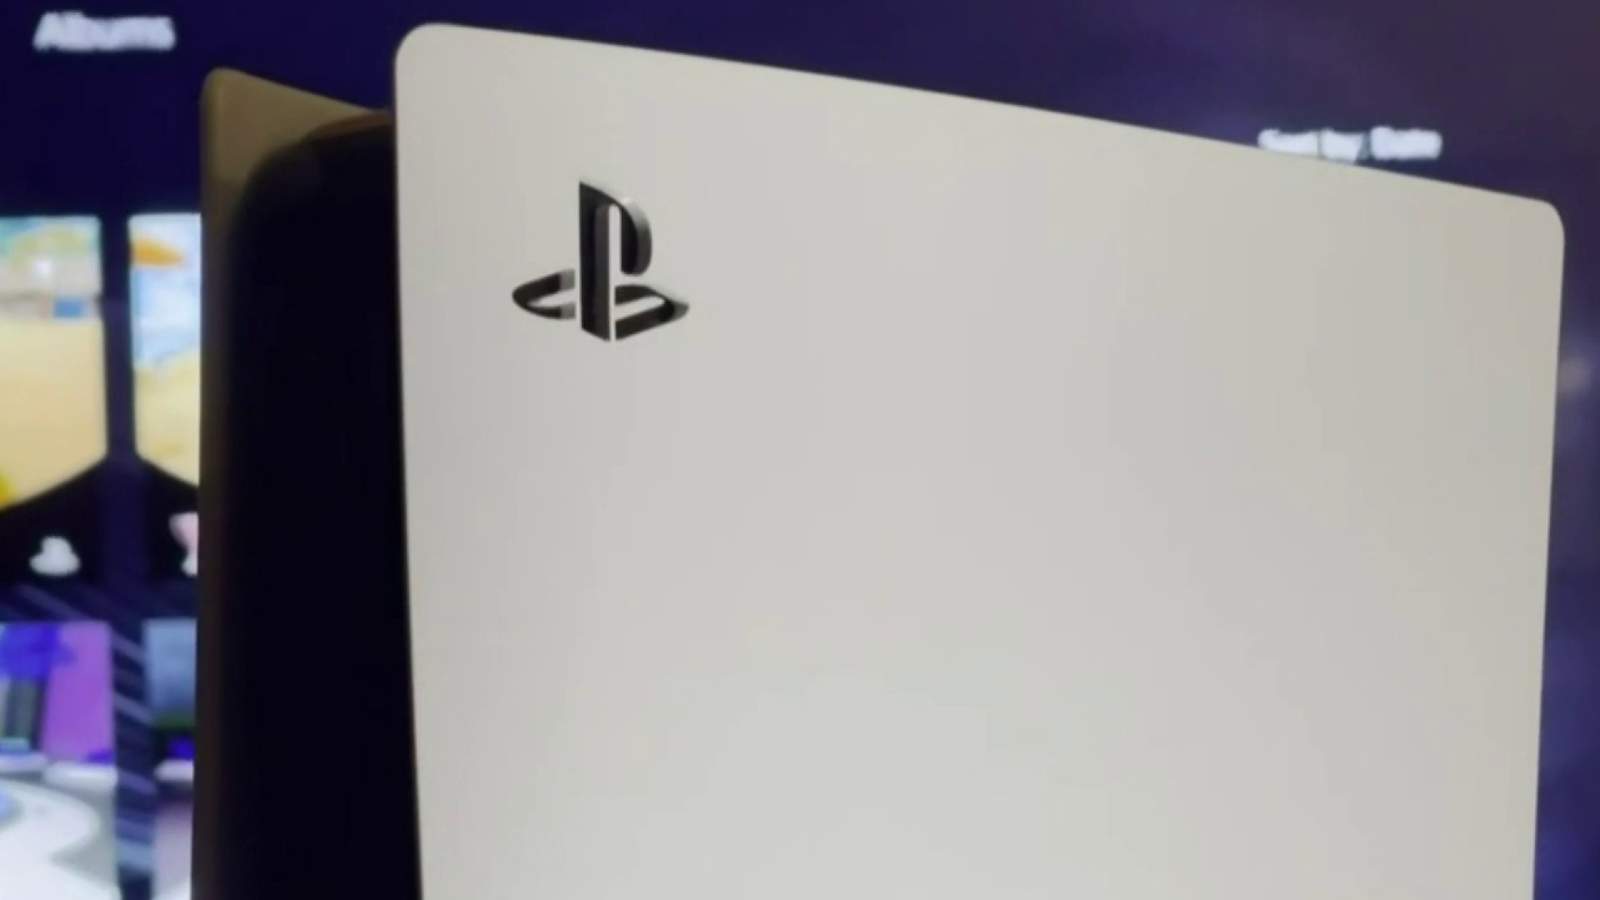 Troy police warn of potential scams when reselling PlayStation 5